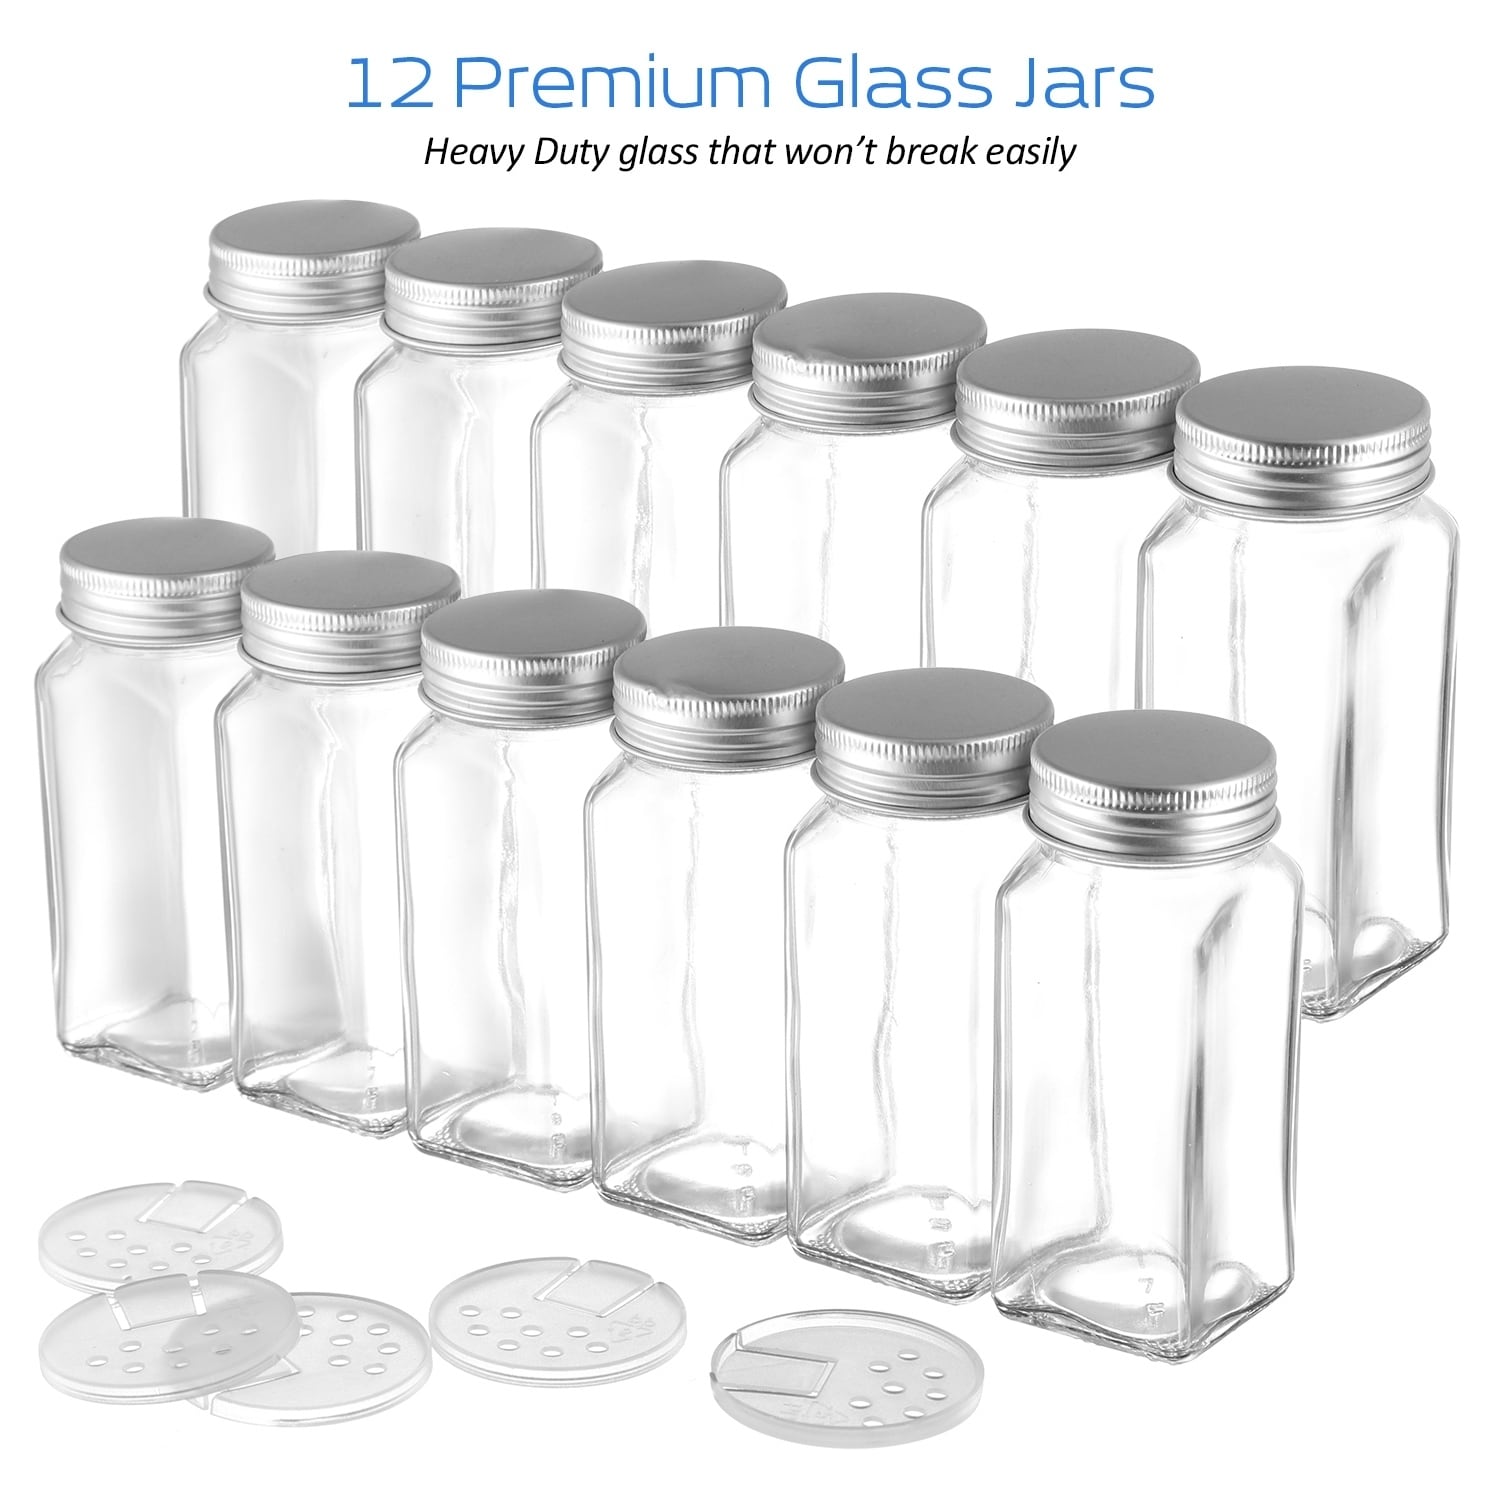 https://ak1.ostkcdn.com/images/products/30268086/SleekDine-8-oz-Glass-Spice-Jars-with-Lids-Set-of-12-5-3-8-x-2-with-a-1-opening-7a5e6bd6-104e-45d6-a63b-cbcbe27223c1.jpg